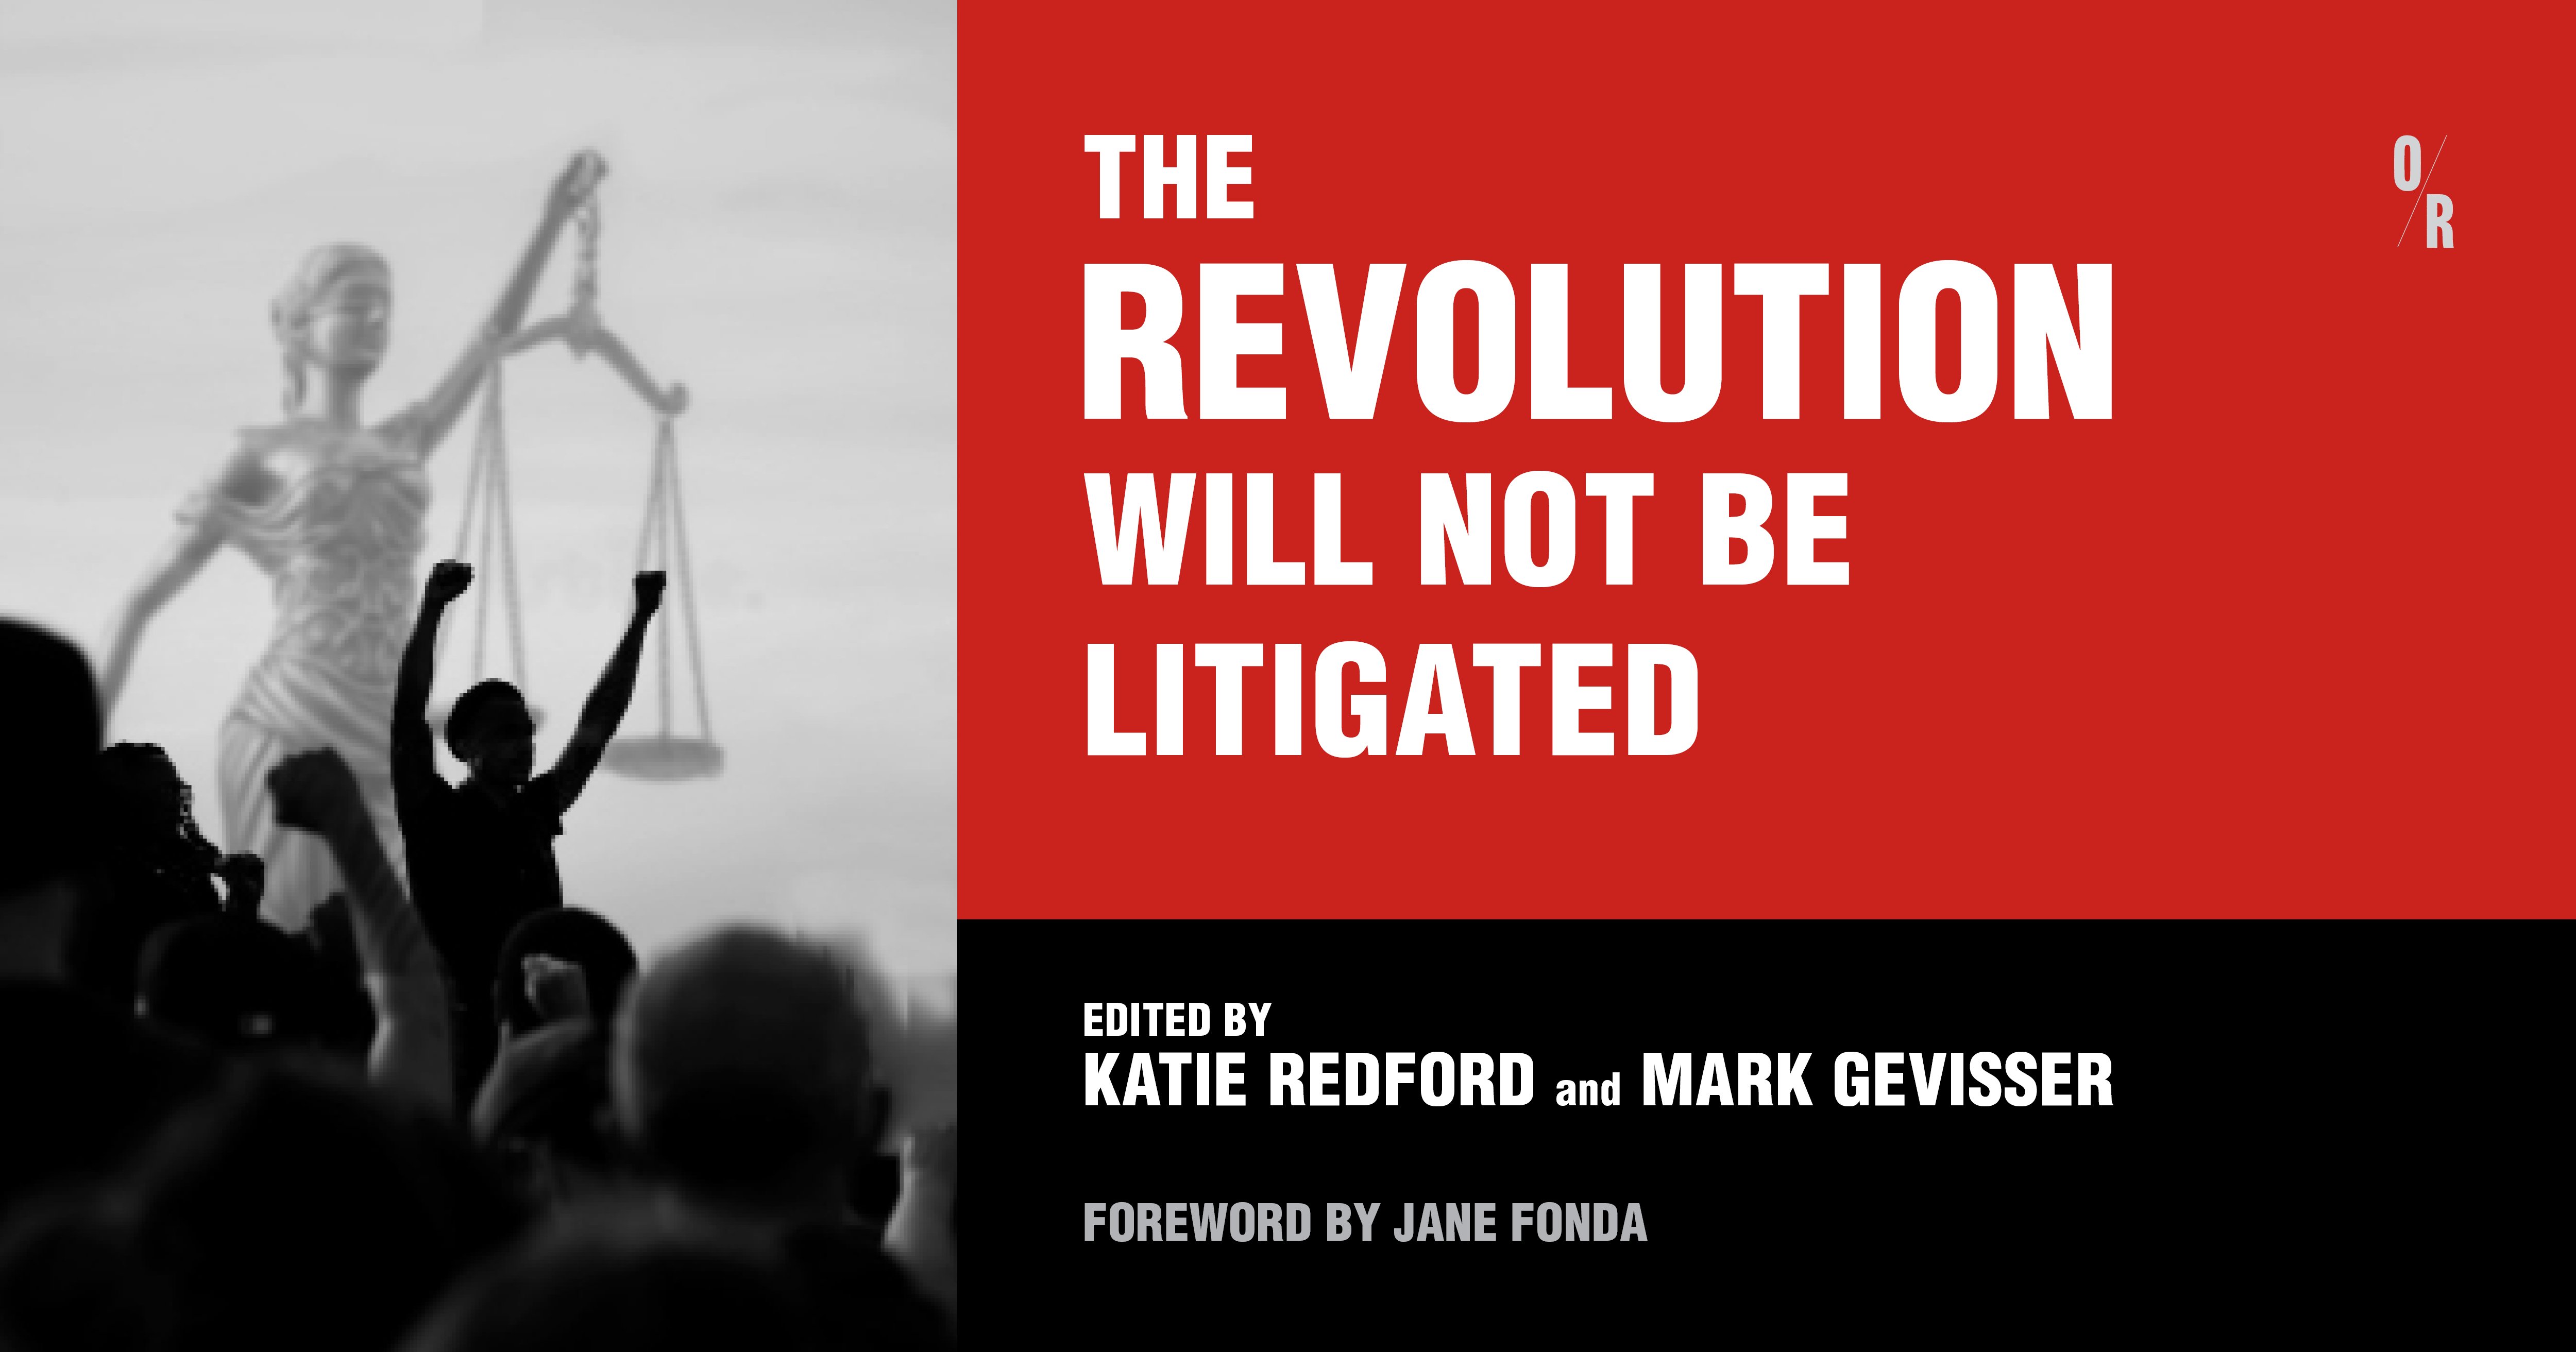 Black and white photo of book cover "The Revolution Will Not be Litigated" to the left. To the right is the book title and "edited by Katie Redford and Mark Gevisser, Foreword by Jane Fonda" in white text.